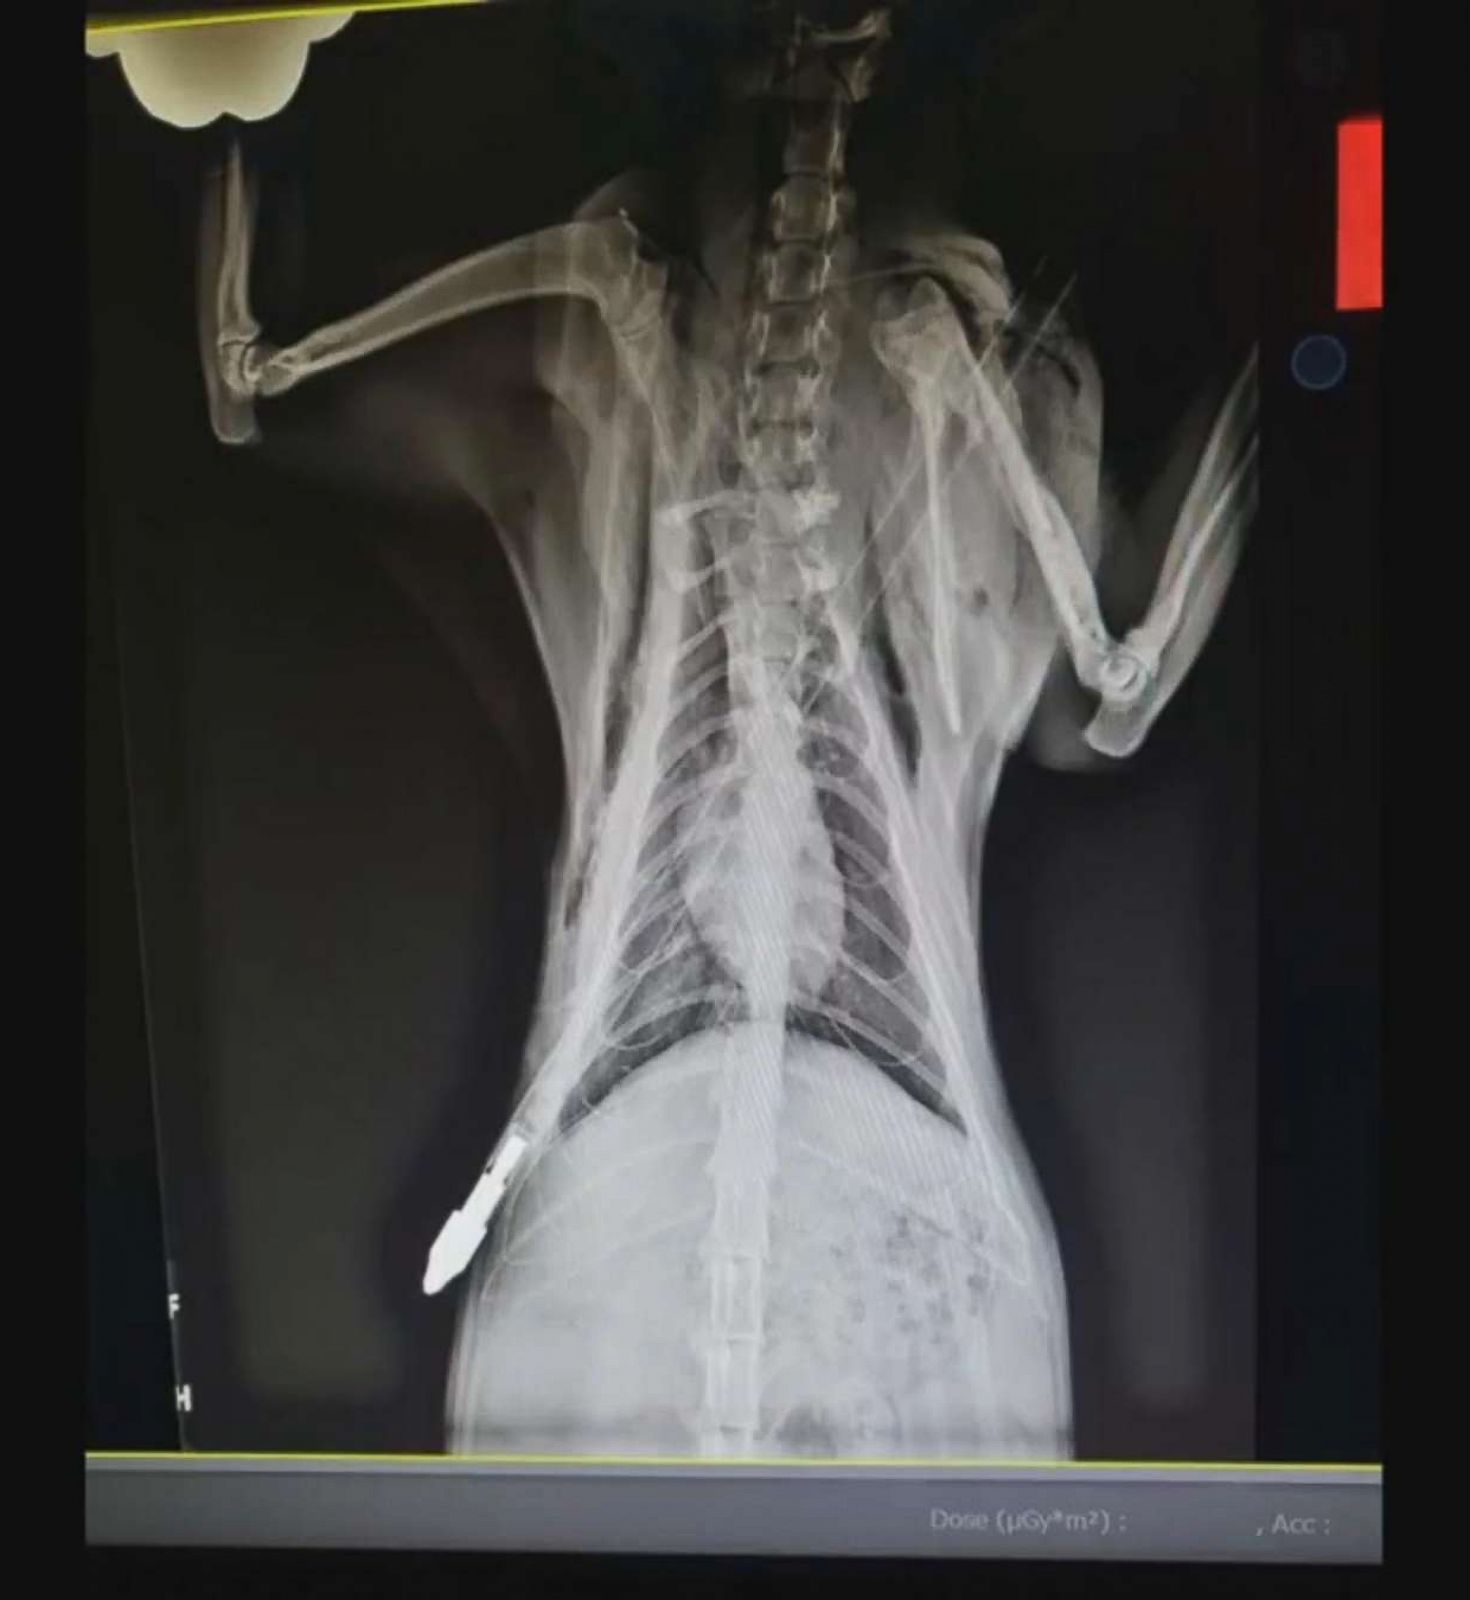 X-rays, skewers, dogs and cats